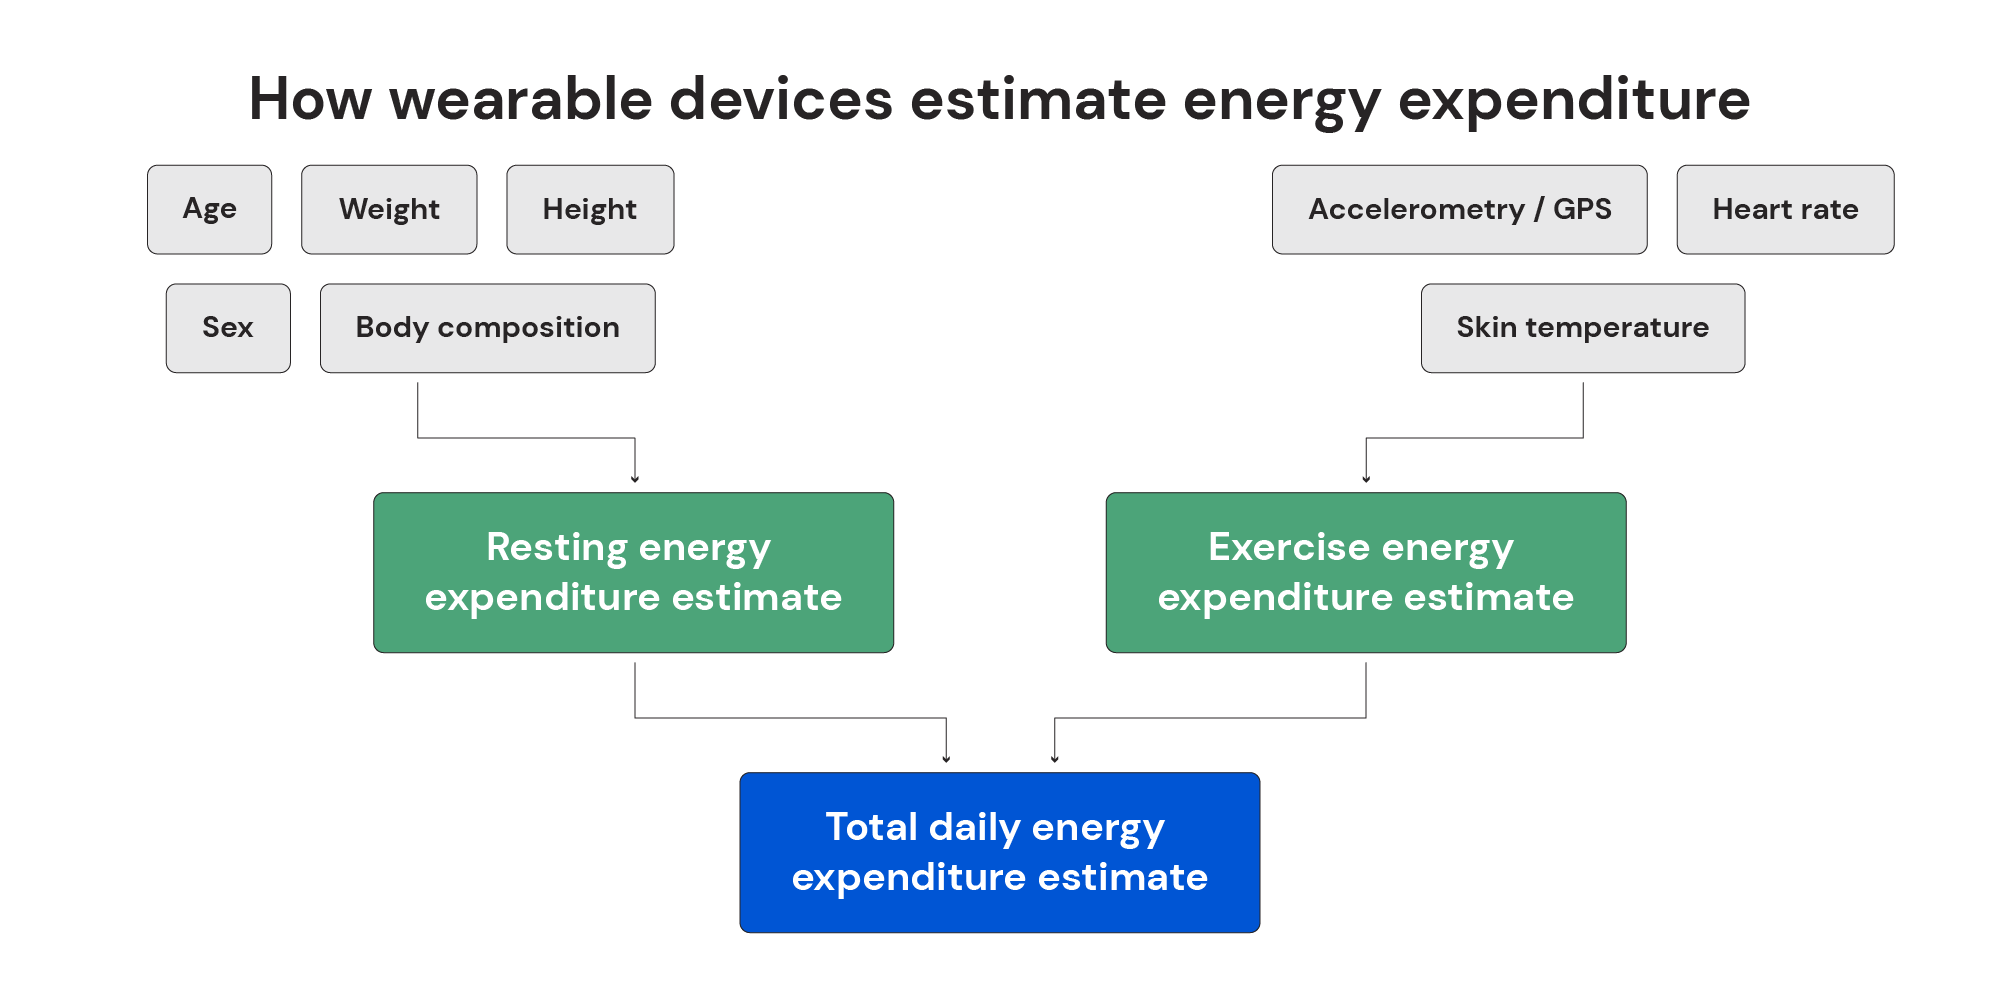 How wearable devices estimate energy expenditure